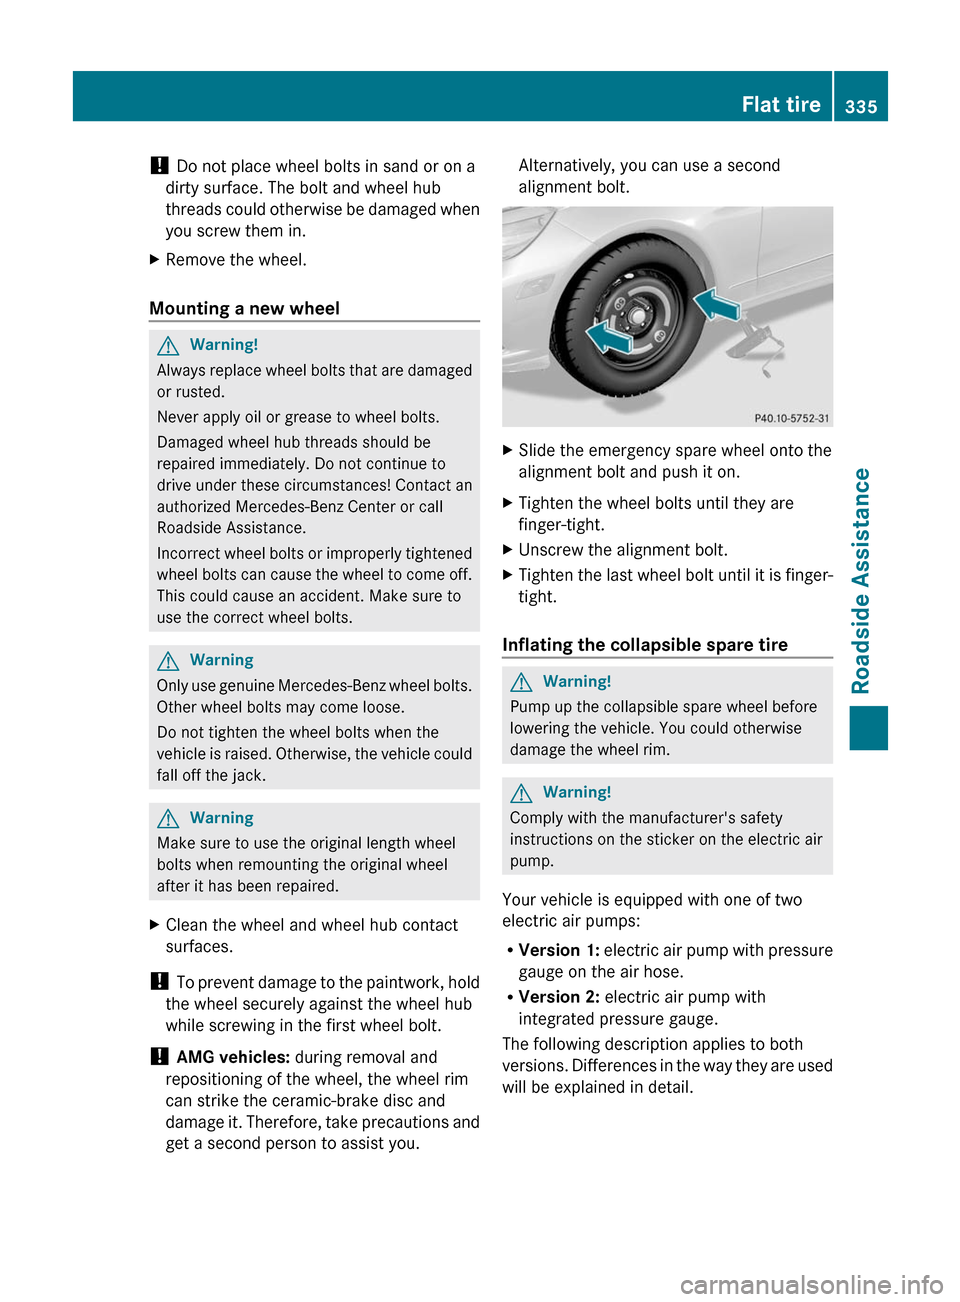 MERCEDES-BENZ E300 BLUETEC 2011 W212 User Guide ! Do not place wheel bolts in sand or on a
dirty surface. The bolt and wheel hub
threads could otherwise be damaged when
you screw them in.XRemove the wheel.
Mounting a new wheel
GWarning!
Always repl